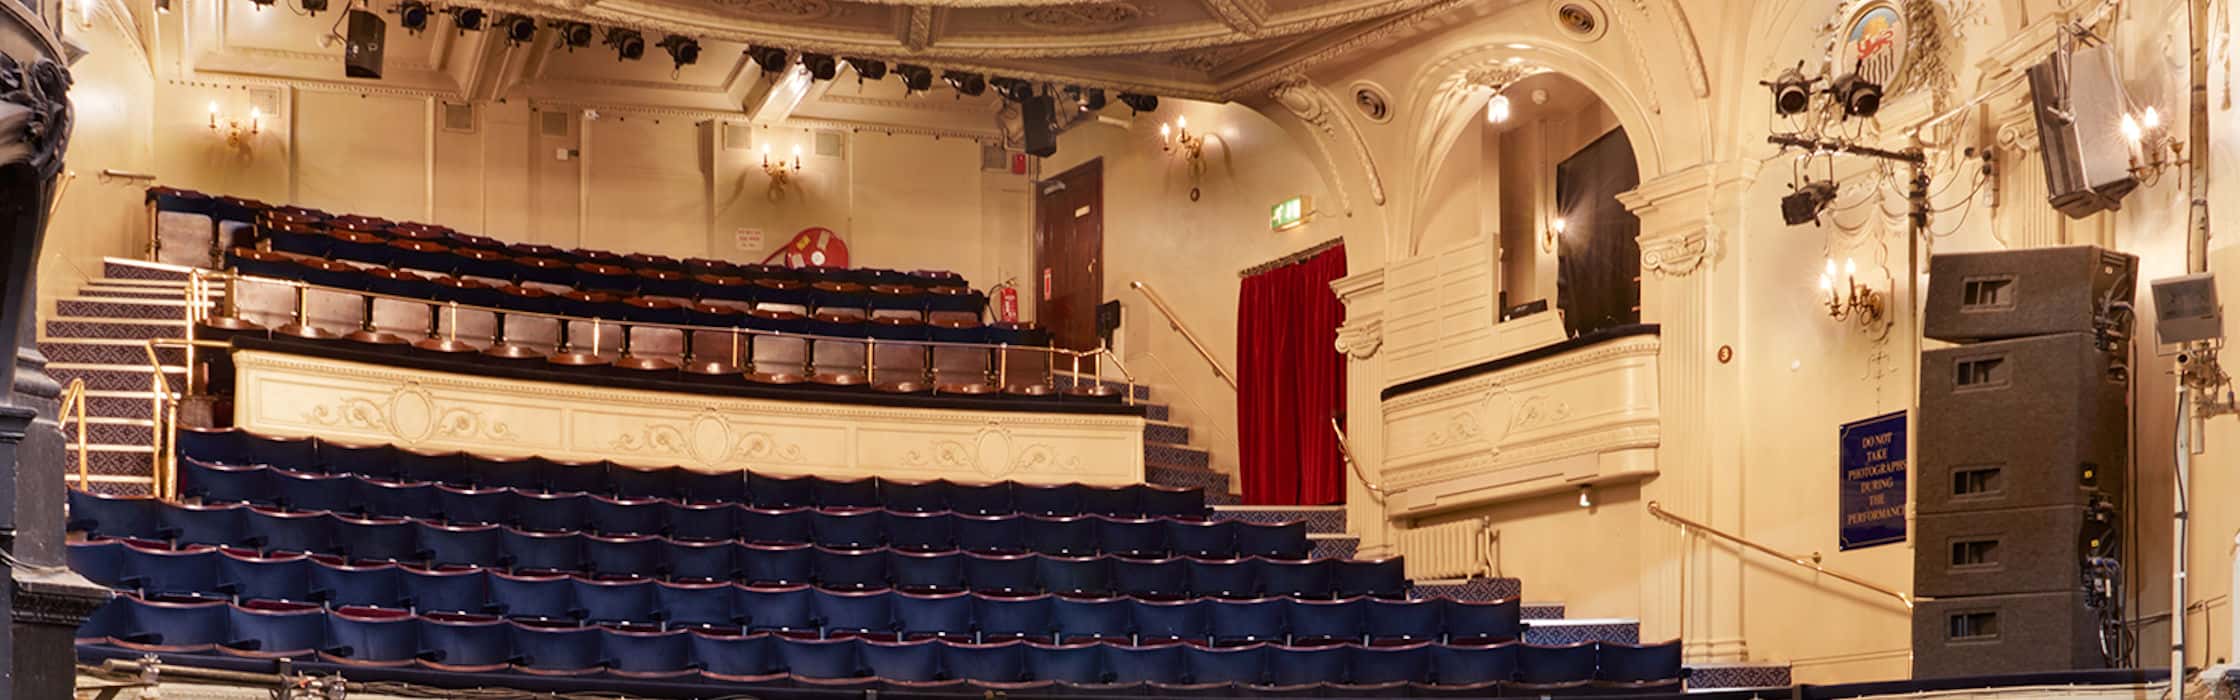 What's On at The Ambassadors Theatre, London